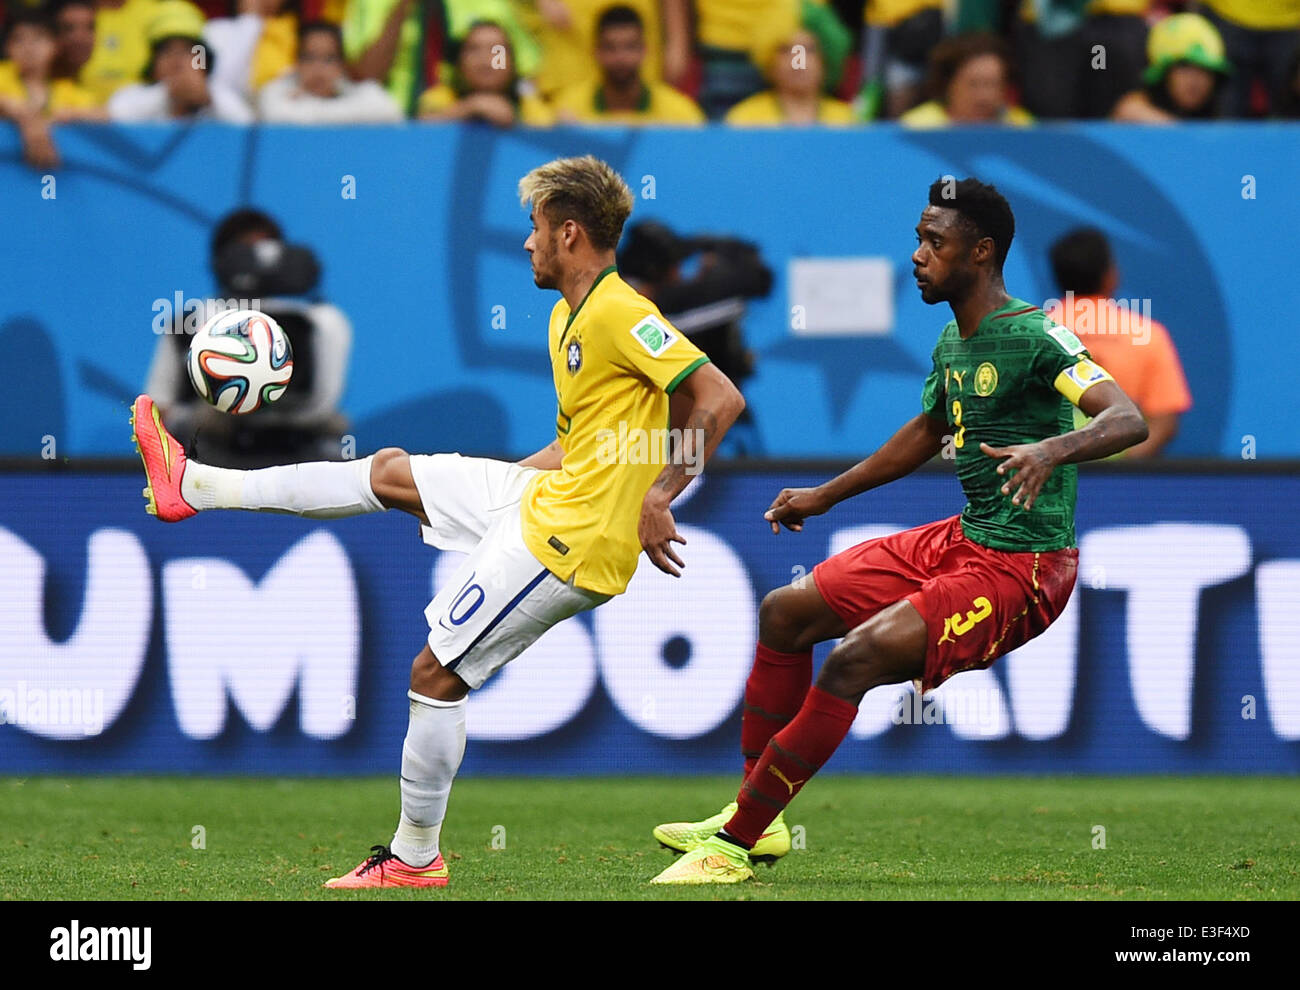 Brasilia, Brazil. 23rd June, 2014. Cameroon's Nicolas Nkoulou (R) and Brazil's Neymar vie for the ball during the FIFA World Cup 2014 group A preliminary round match between Cameroon and Brazil at the Estadio Nacional in Brasilia, Brazil, 23 June 2014. Photo: Marius Becker/dpa/Alamy Live News Stock Photo